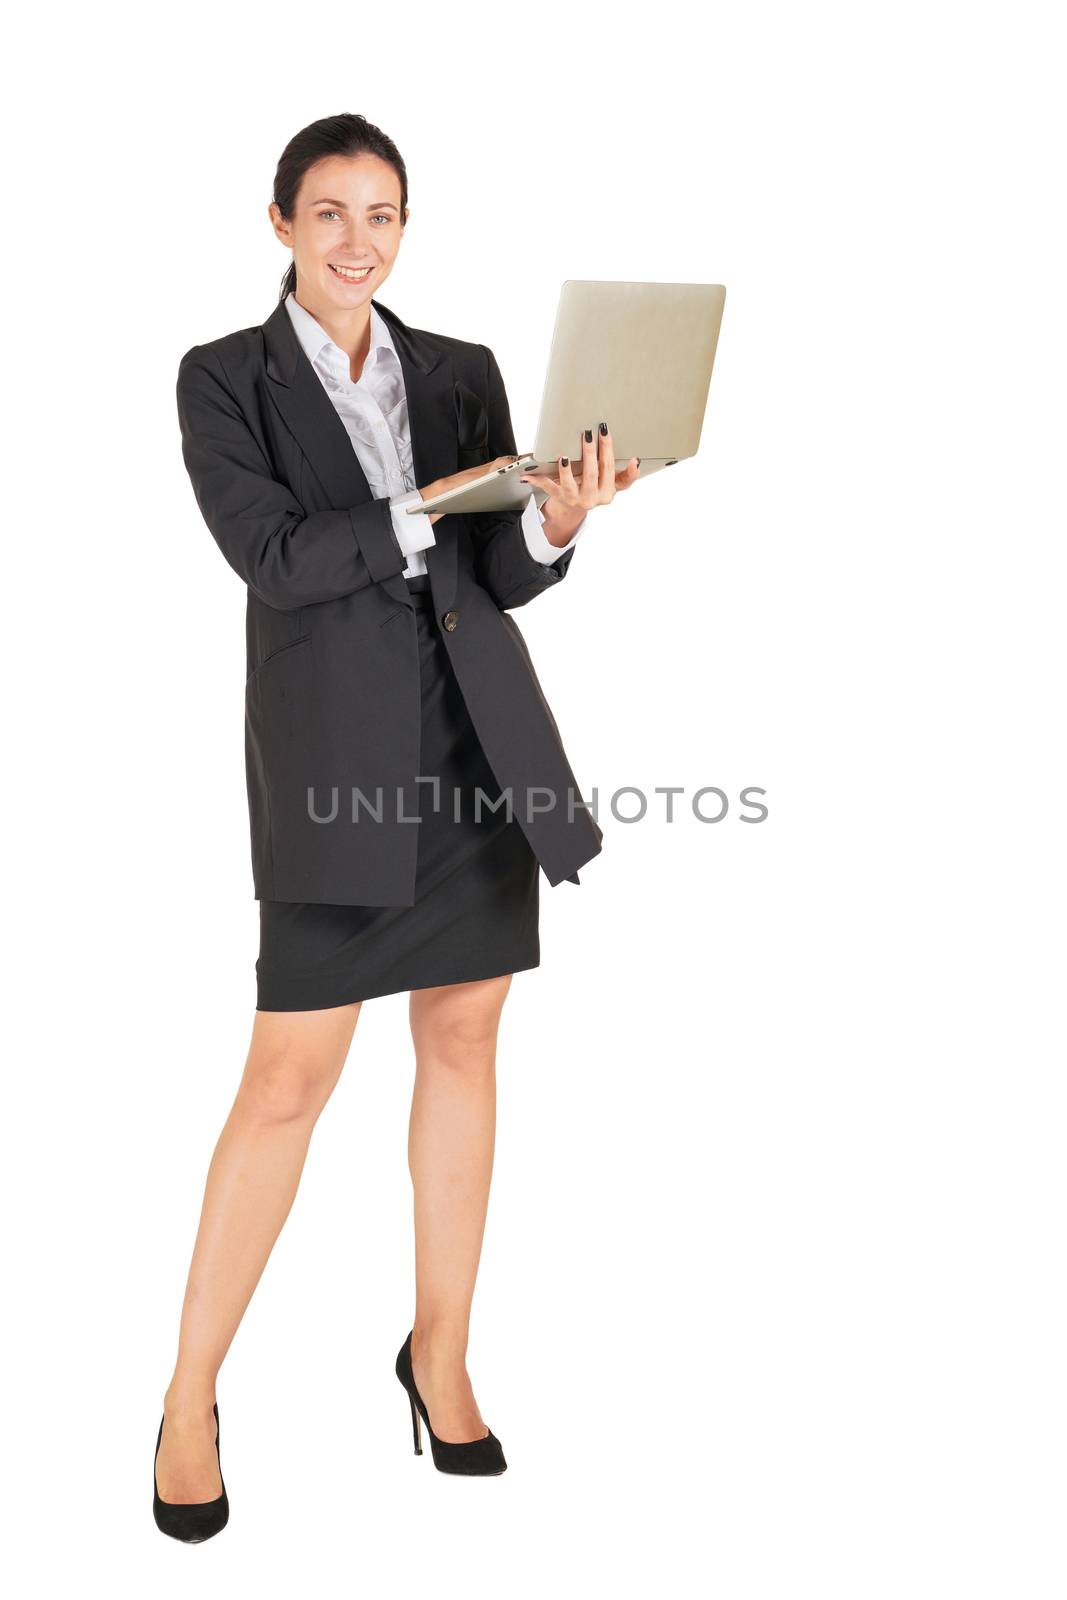 A business woman in a black suit with a smile and typing on a computer notebook. by chadchai_k